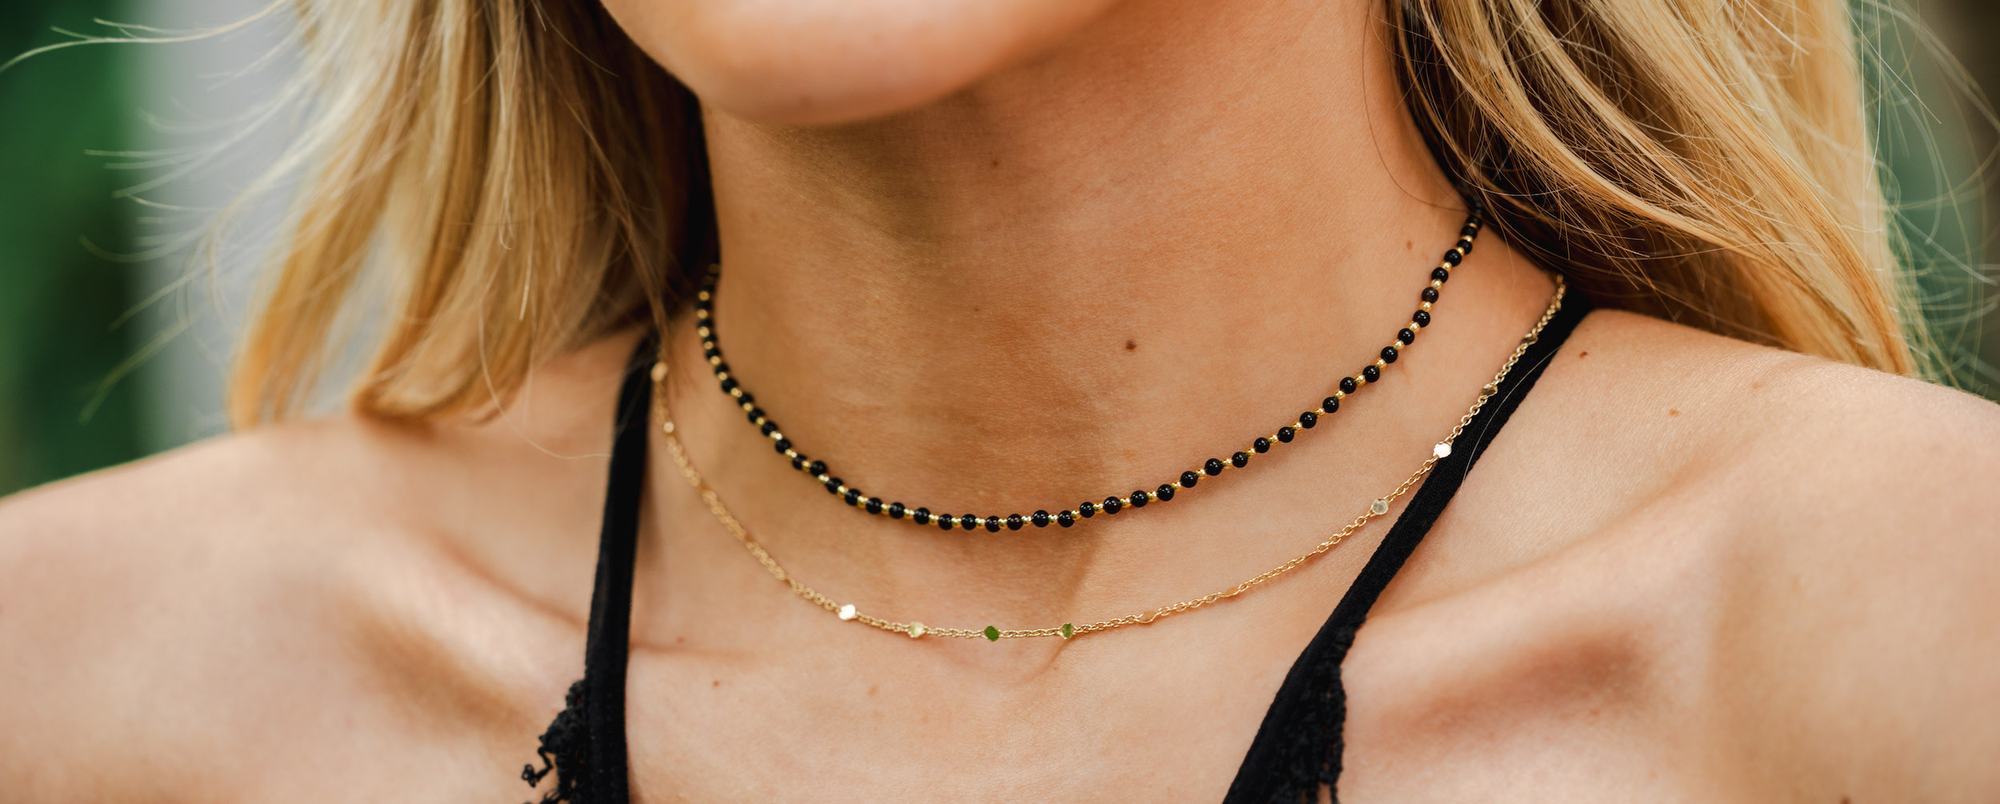 Onyx Necklace and Gold dainty necklace